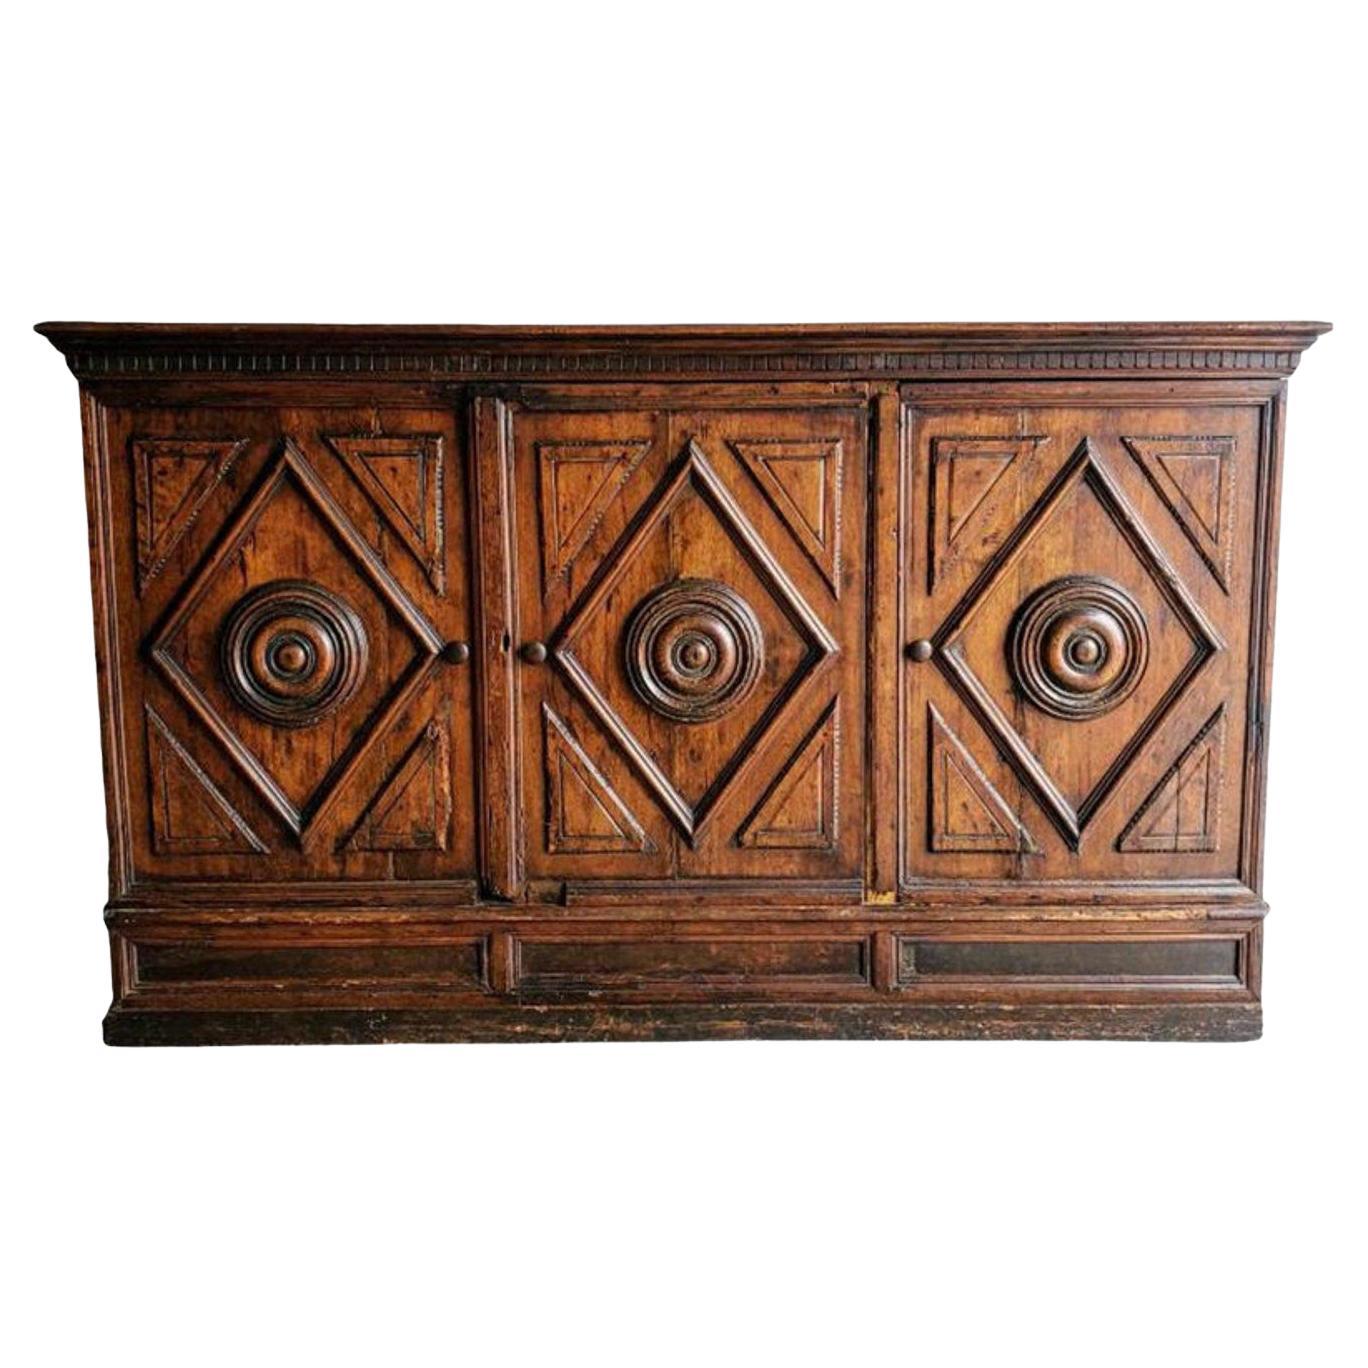 Early 18th Century Italian Baroque Period Carved Walnut Sideboard Credenza  For Sale